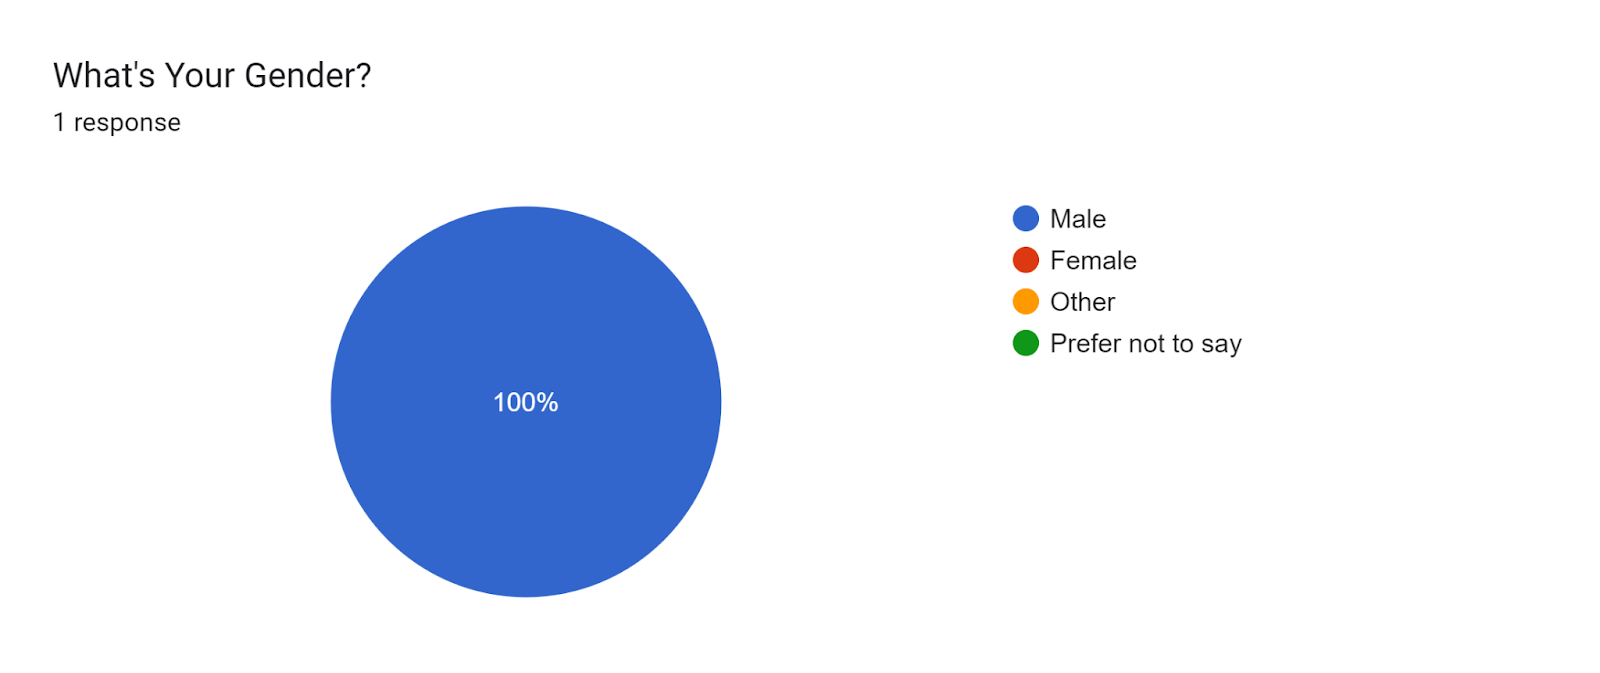 Forms response chart. Question title: What's Your Gender?. Number of responses: 1 response.